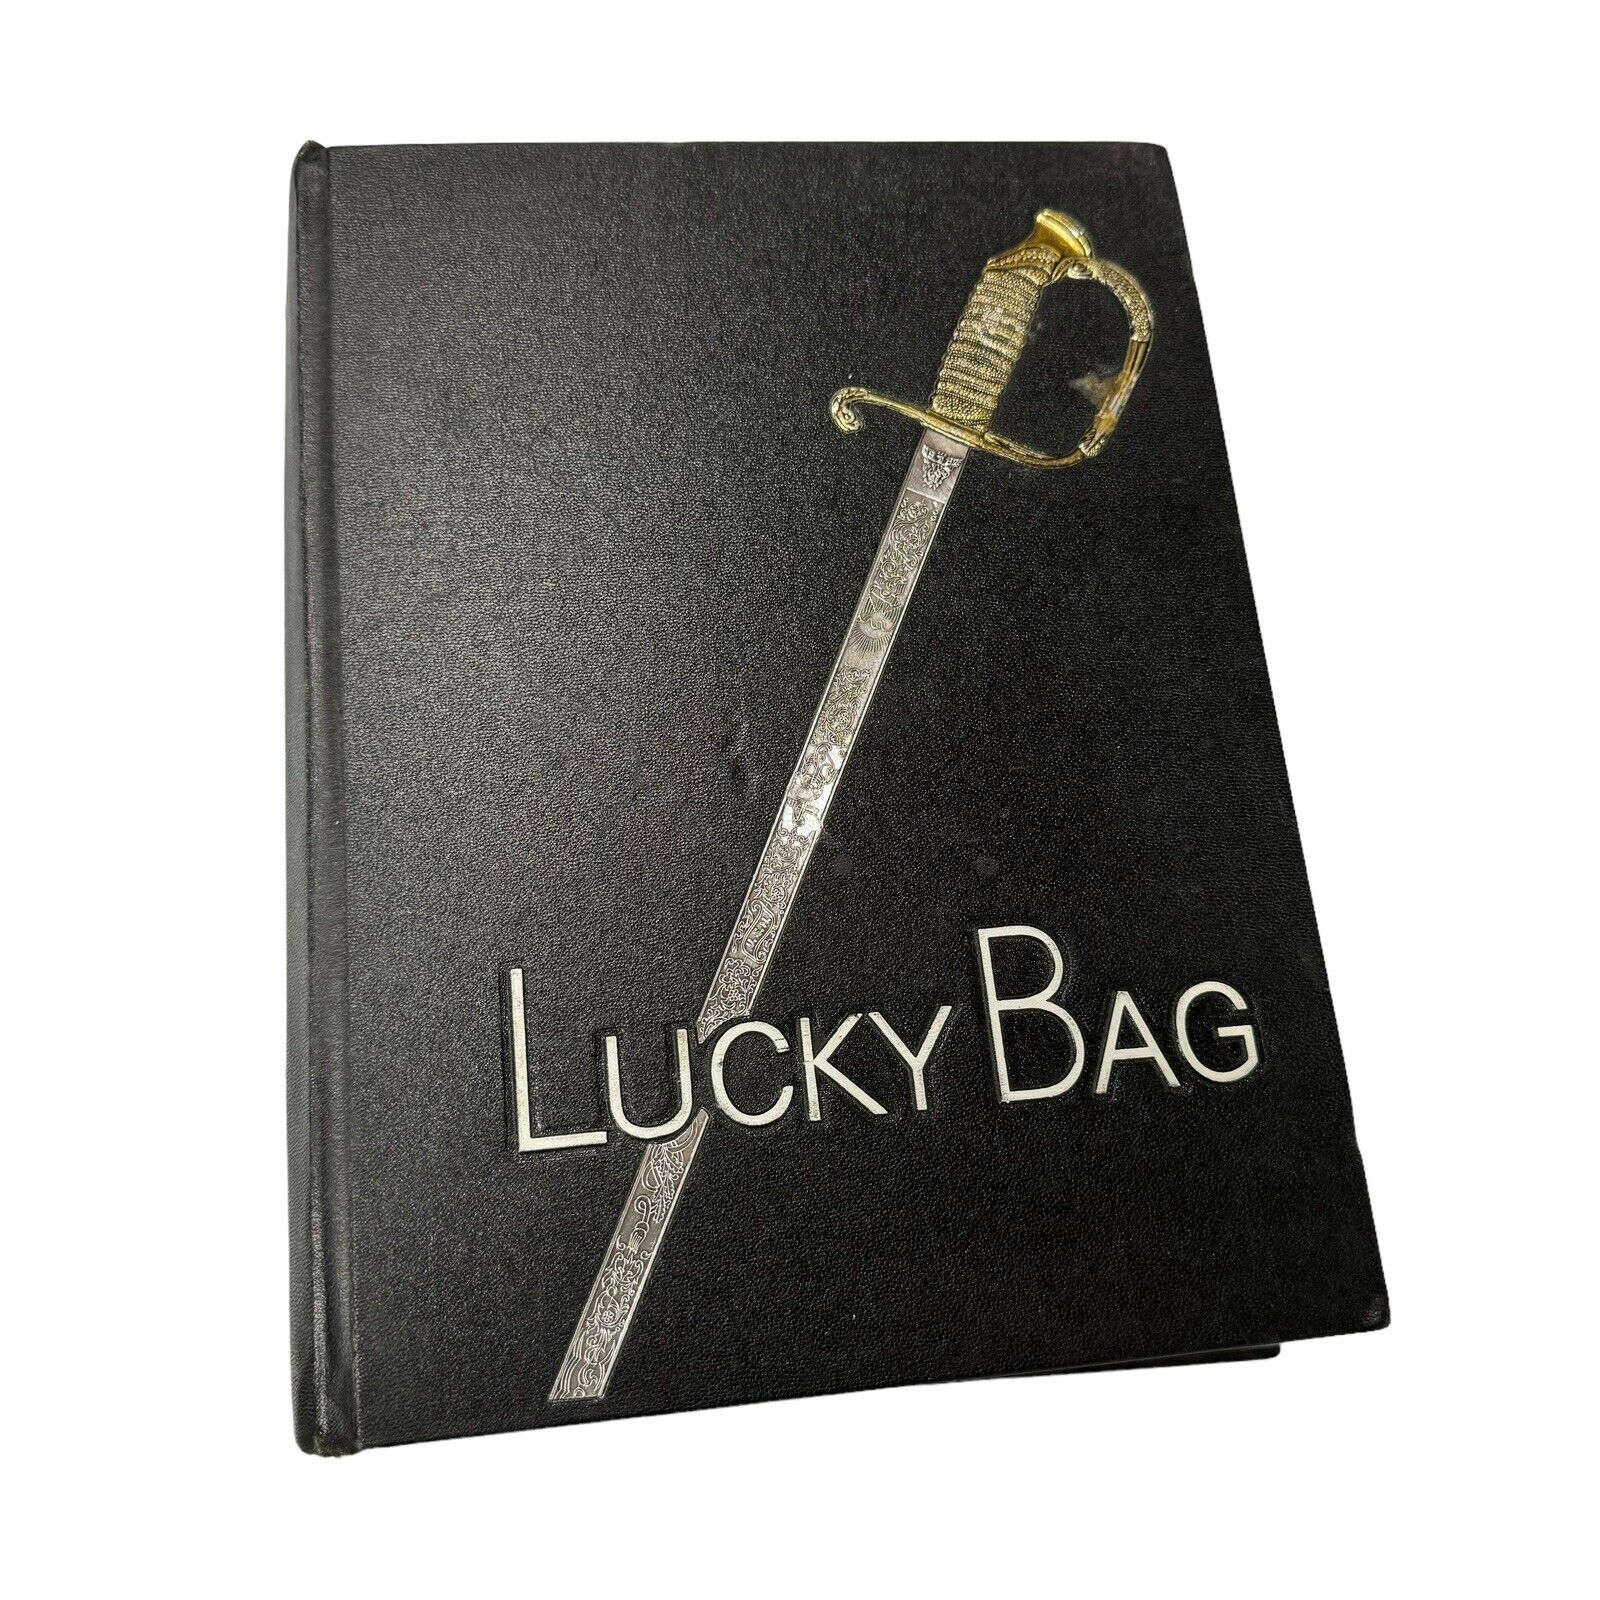 The Lucky Bag 1967 United States Navy Book US Naval Academy Vintage Military